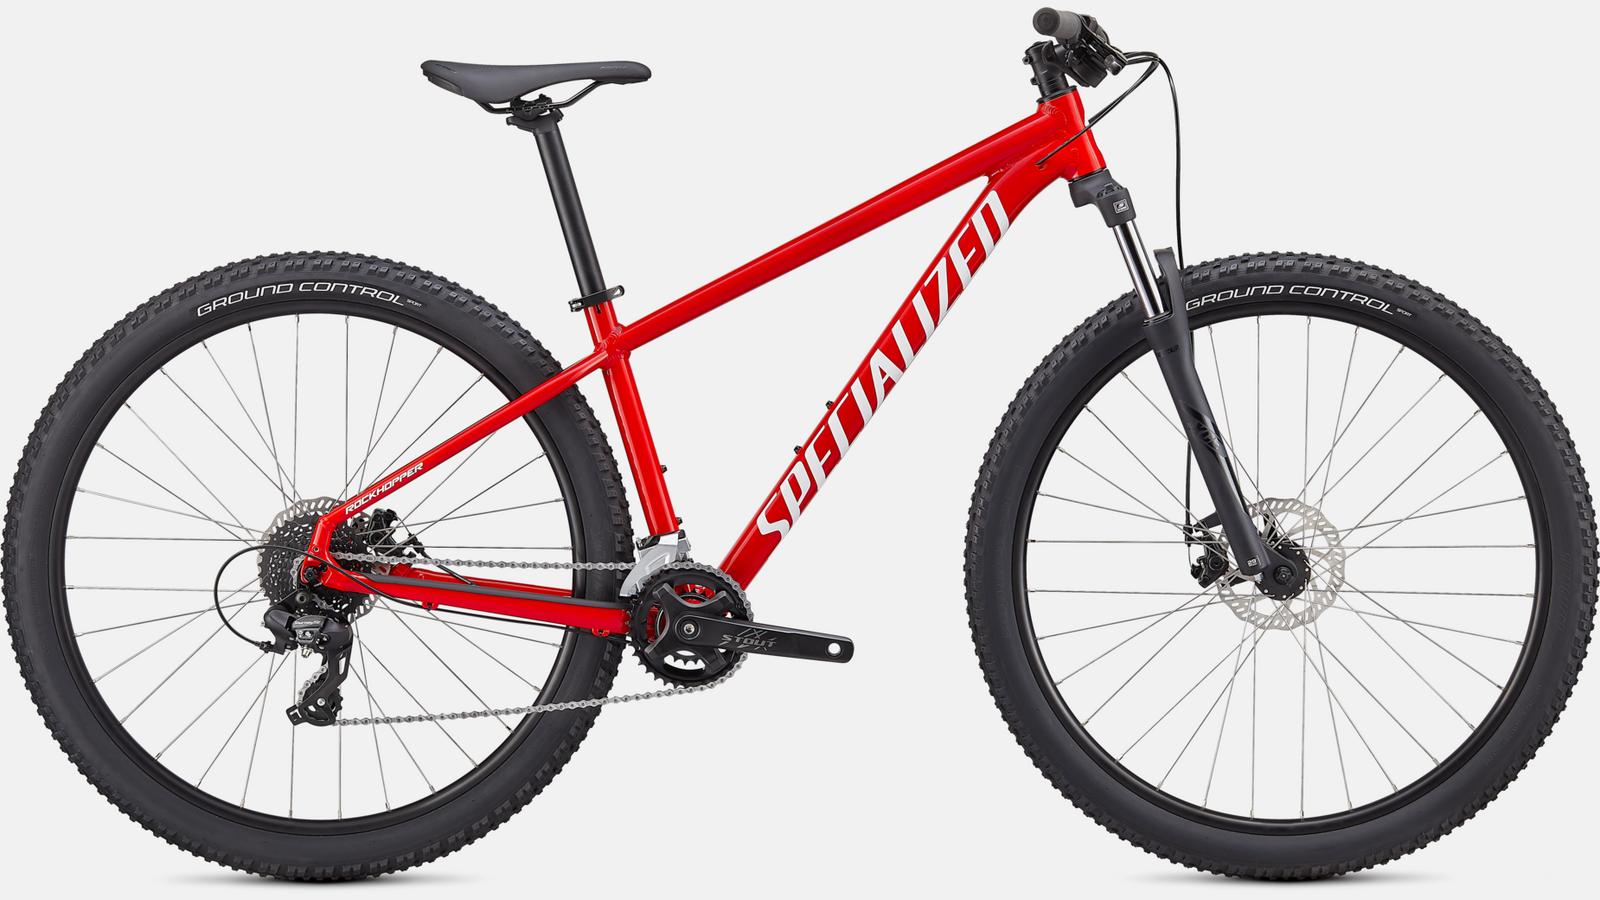 Paint for 2021 Specialized Rockhopper 27.5 - Gloss Flo Red